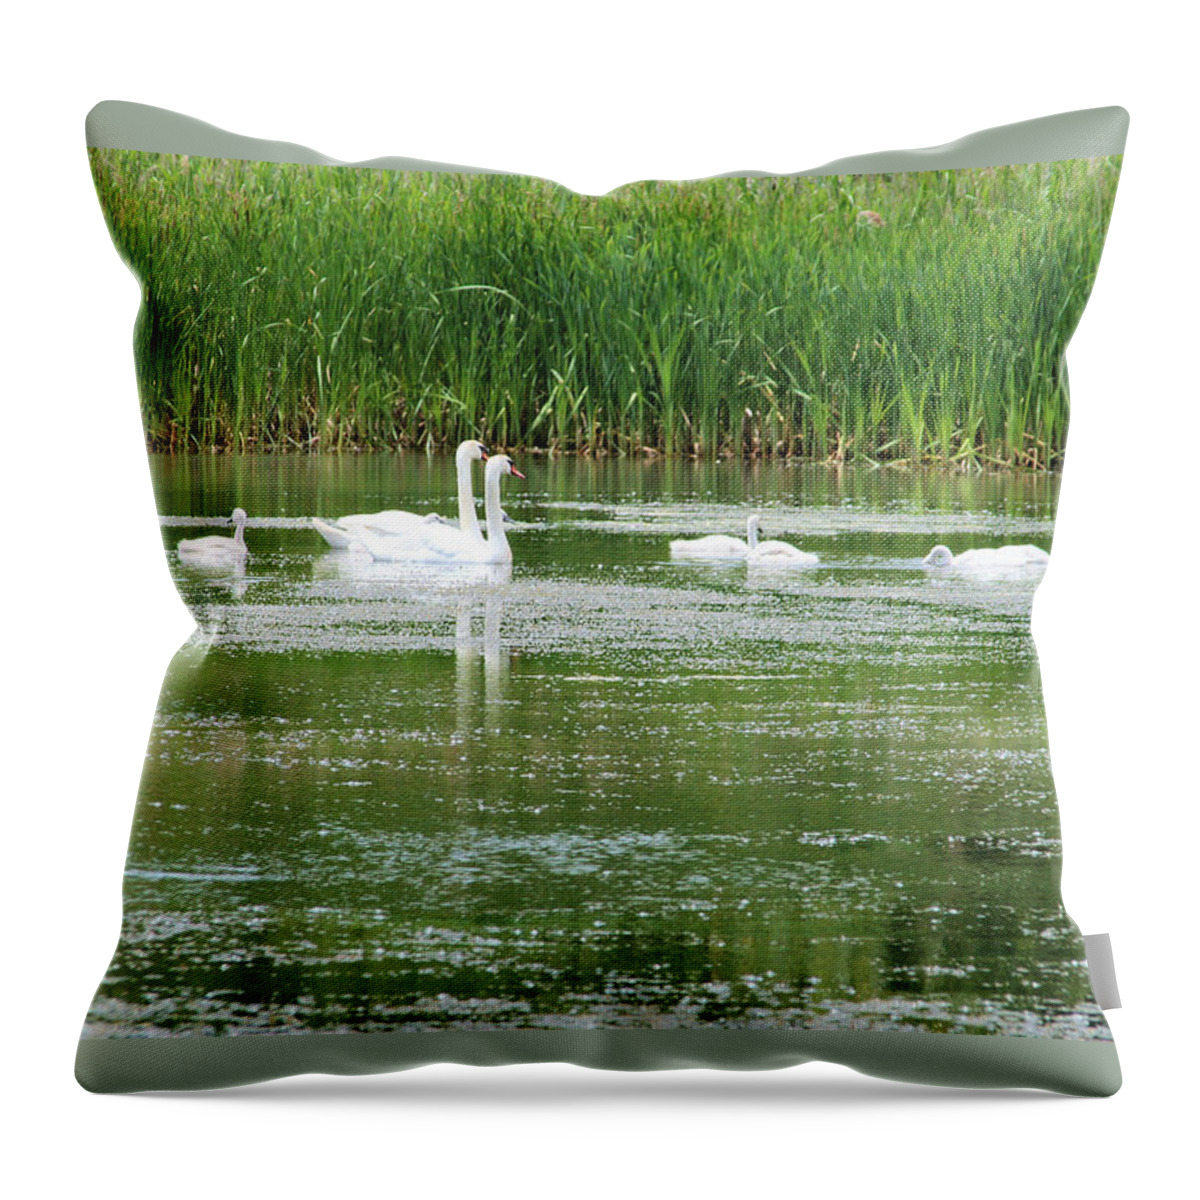 Swans Throw Pillow featuring the photograph Family of Swans by Laura Smith